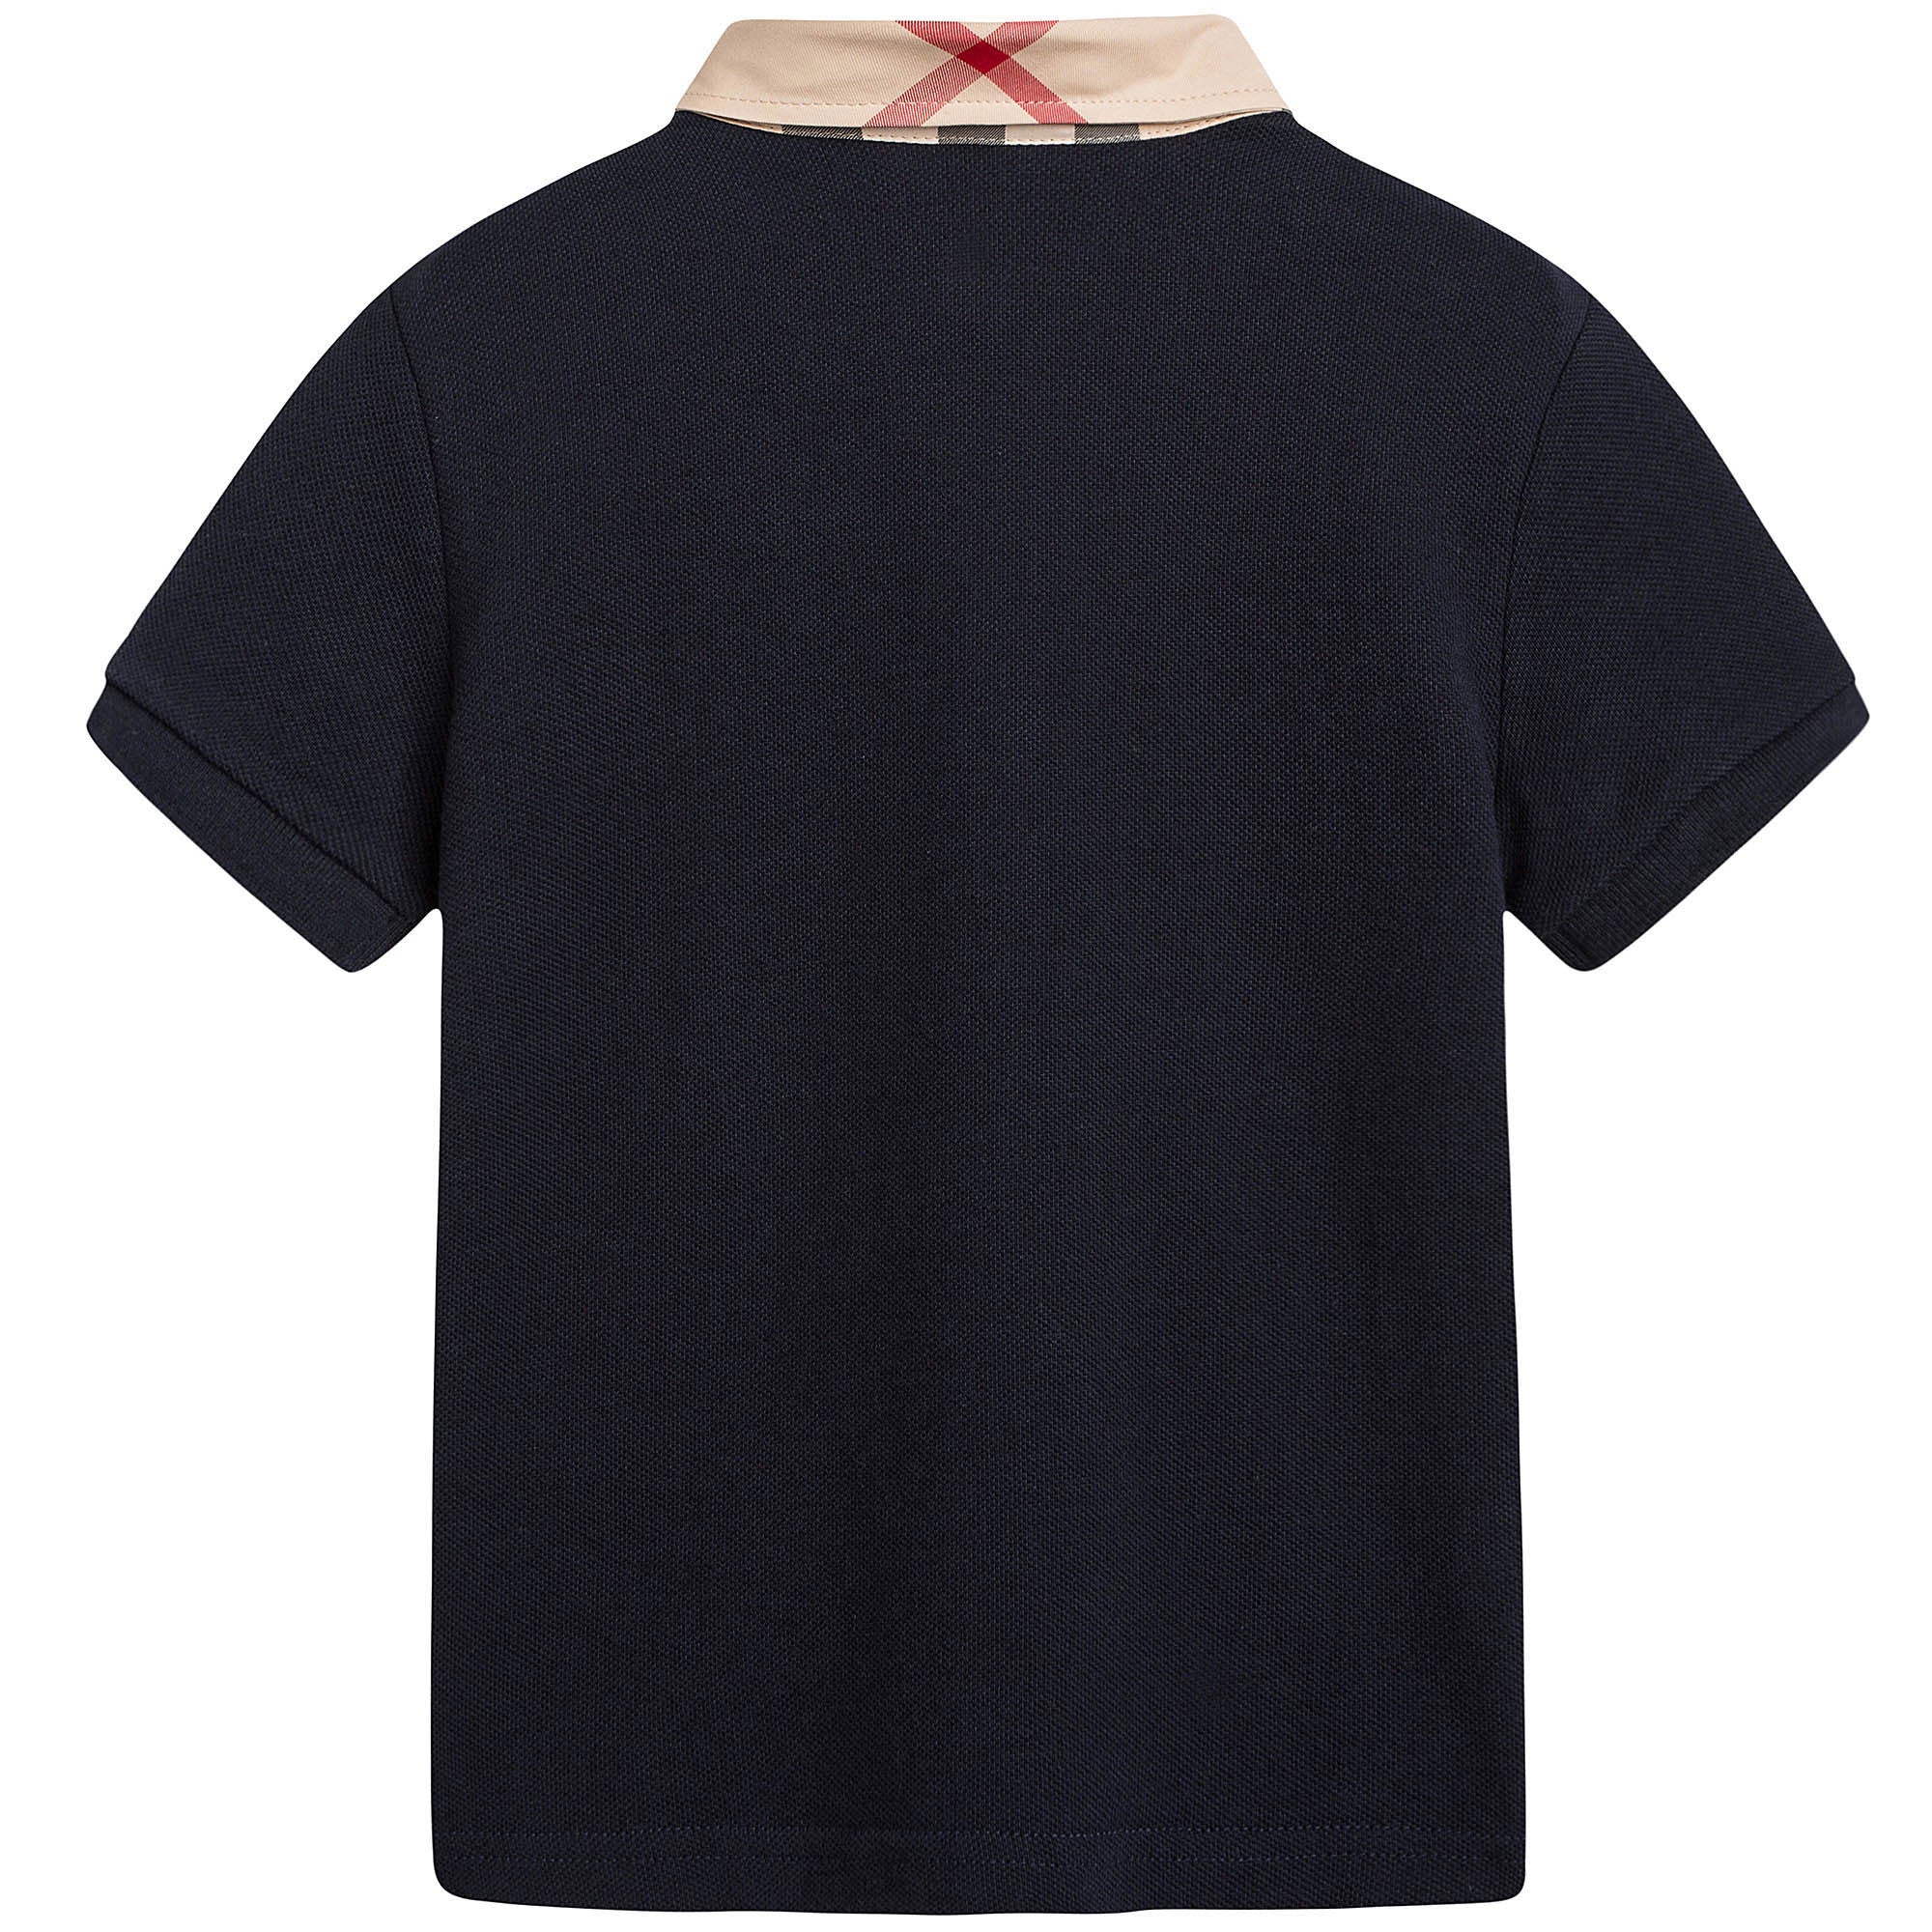 Boys Navy Blue Polo Shirt With Classic Check Collar - CÉMAROSE | Children's Fashion Store - 2